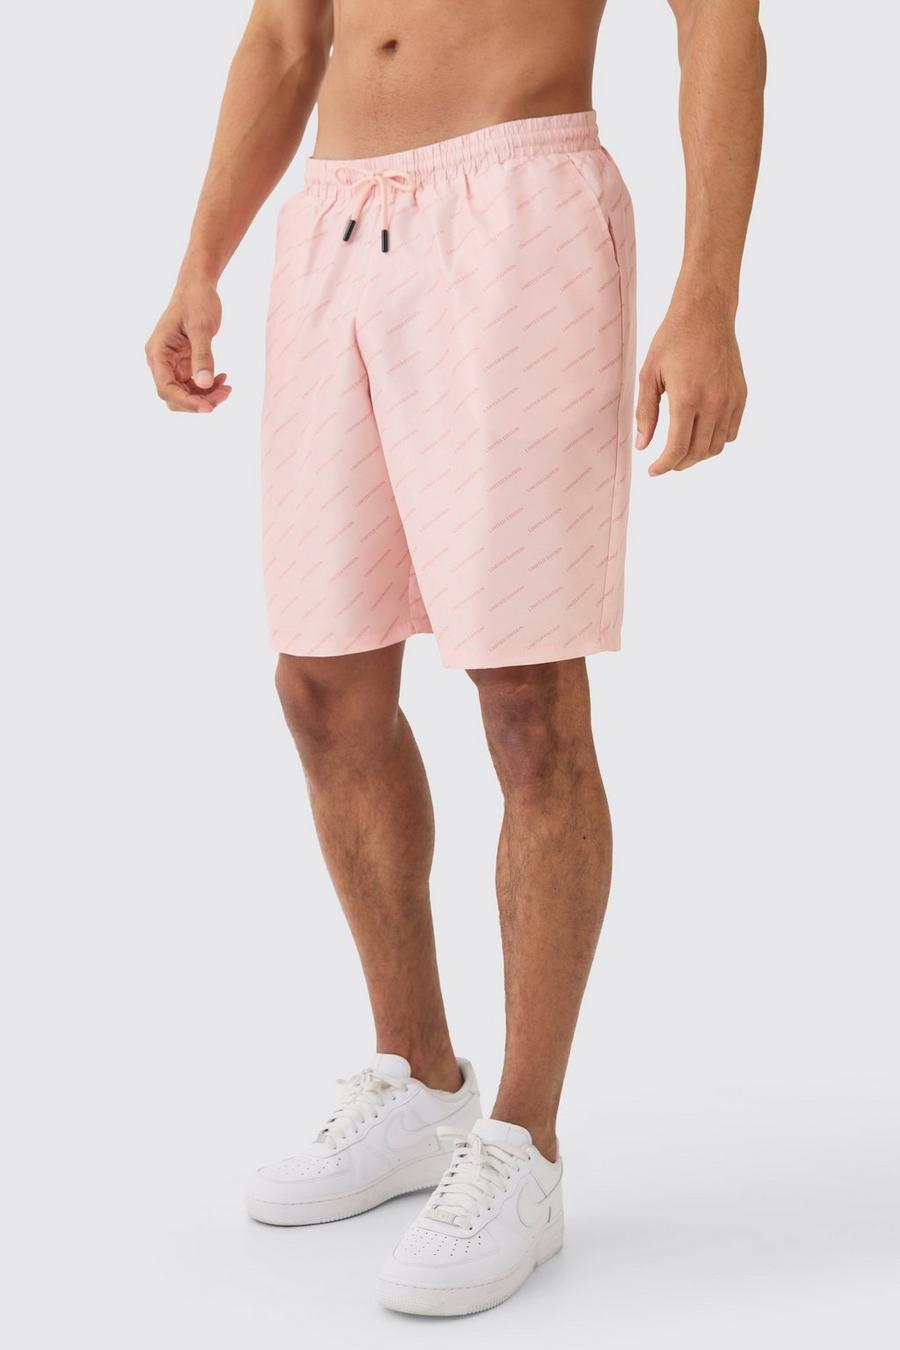 Limited Edition Badehose, Pink